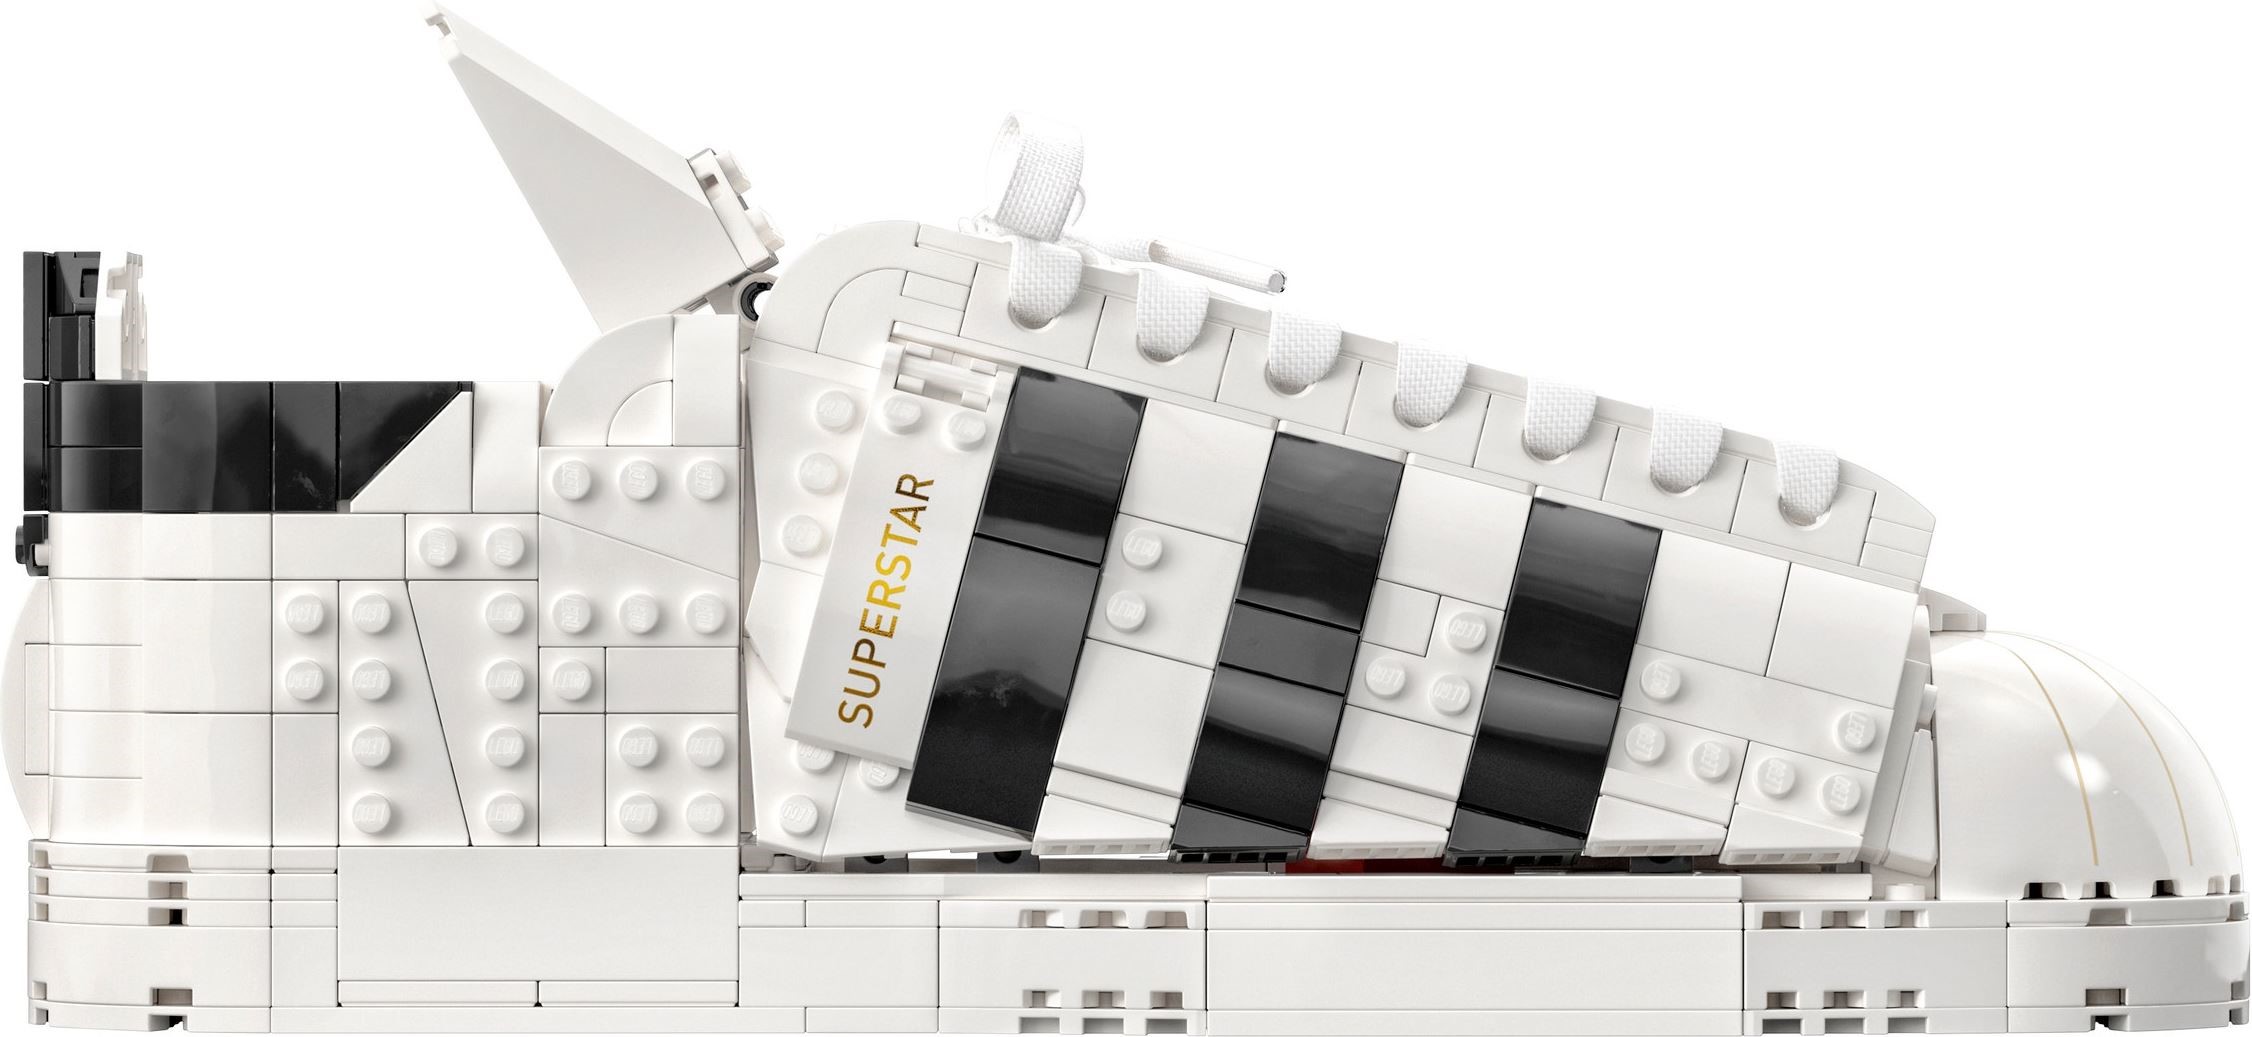 LEGO® Icons adidas Originals Superstar 10282 Building Kit; Build and  Display the Iconic Trainer